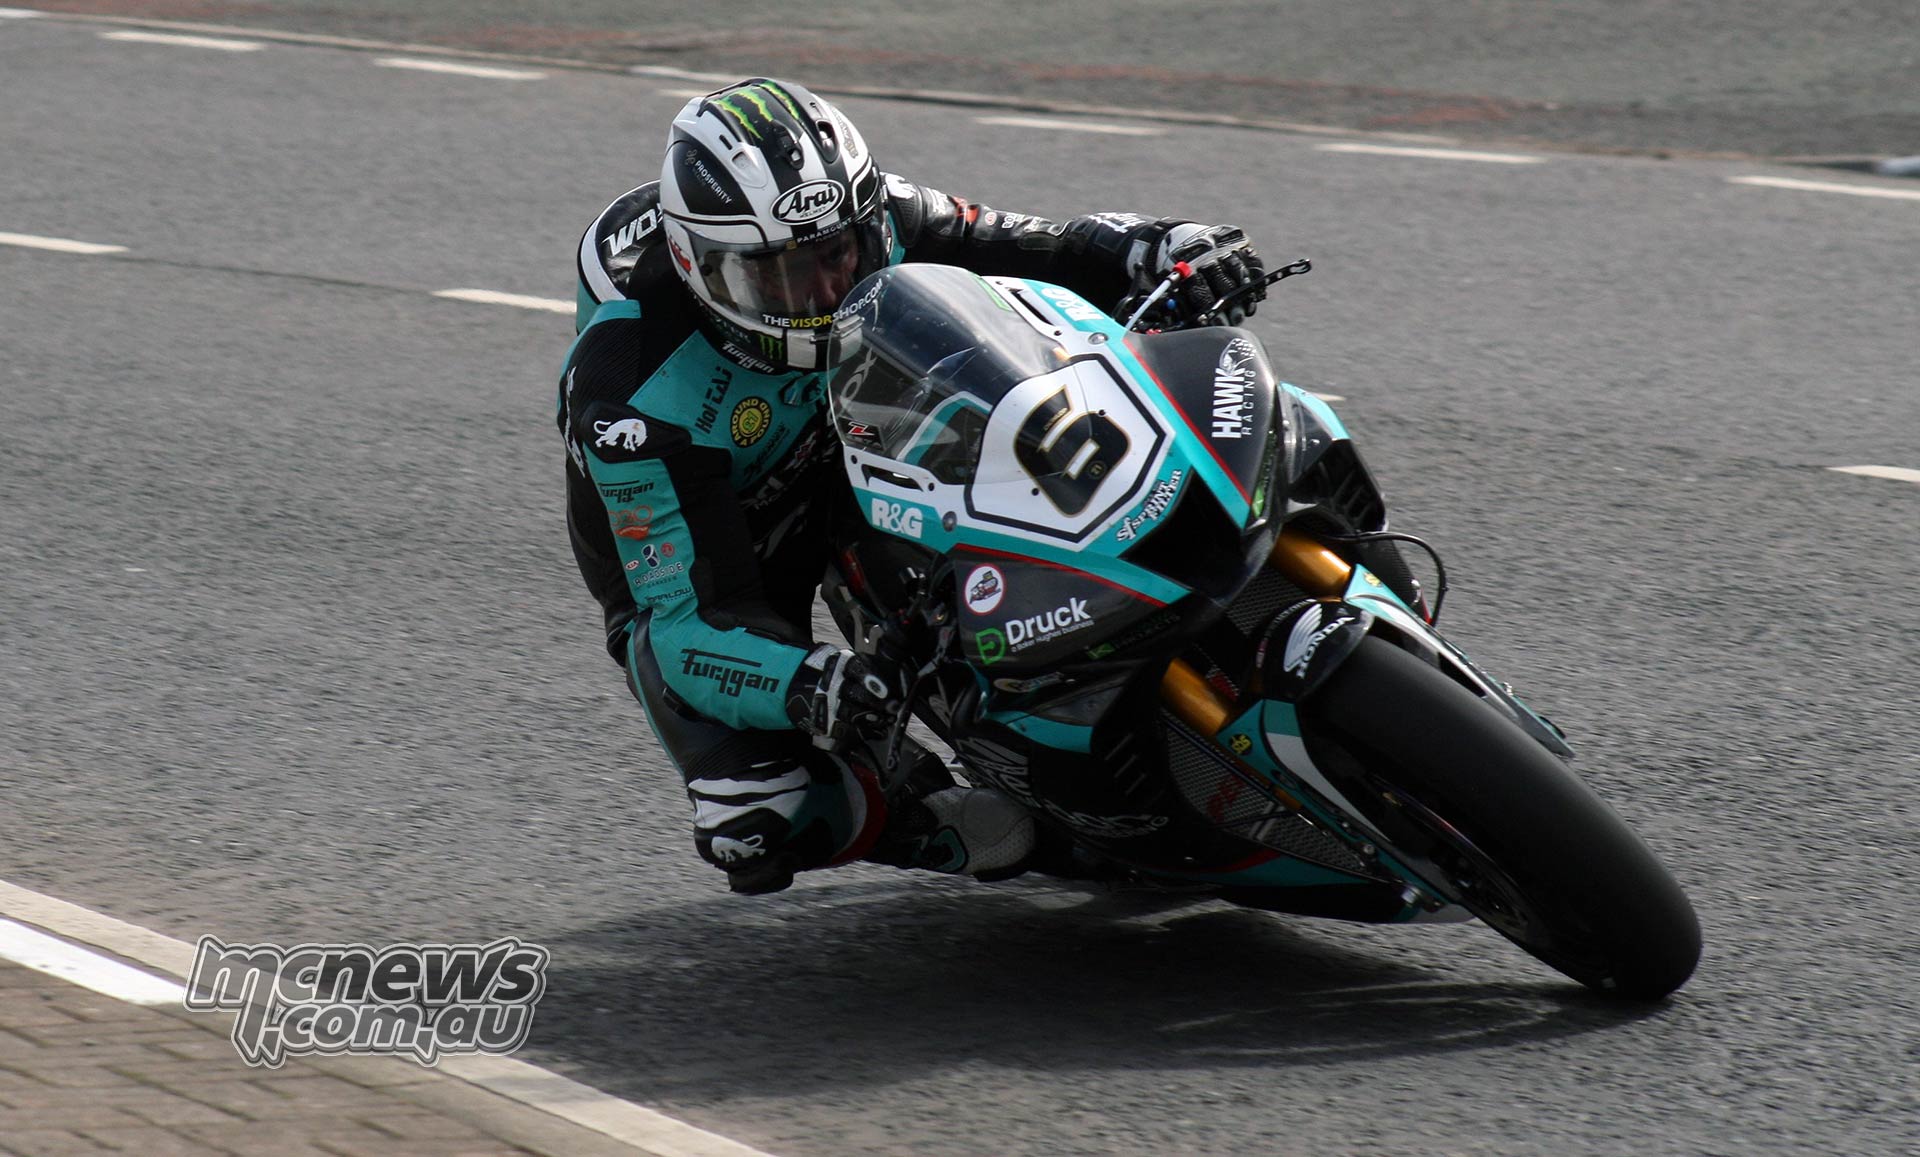 North West 200 gets underway with Dunlop and Seeley setting the pace